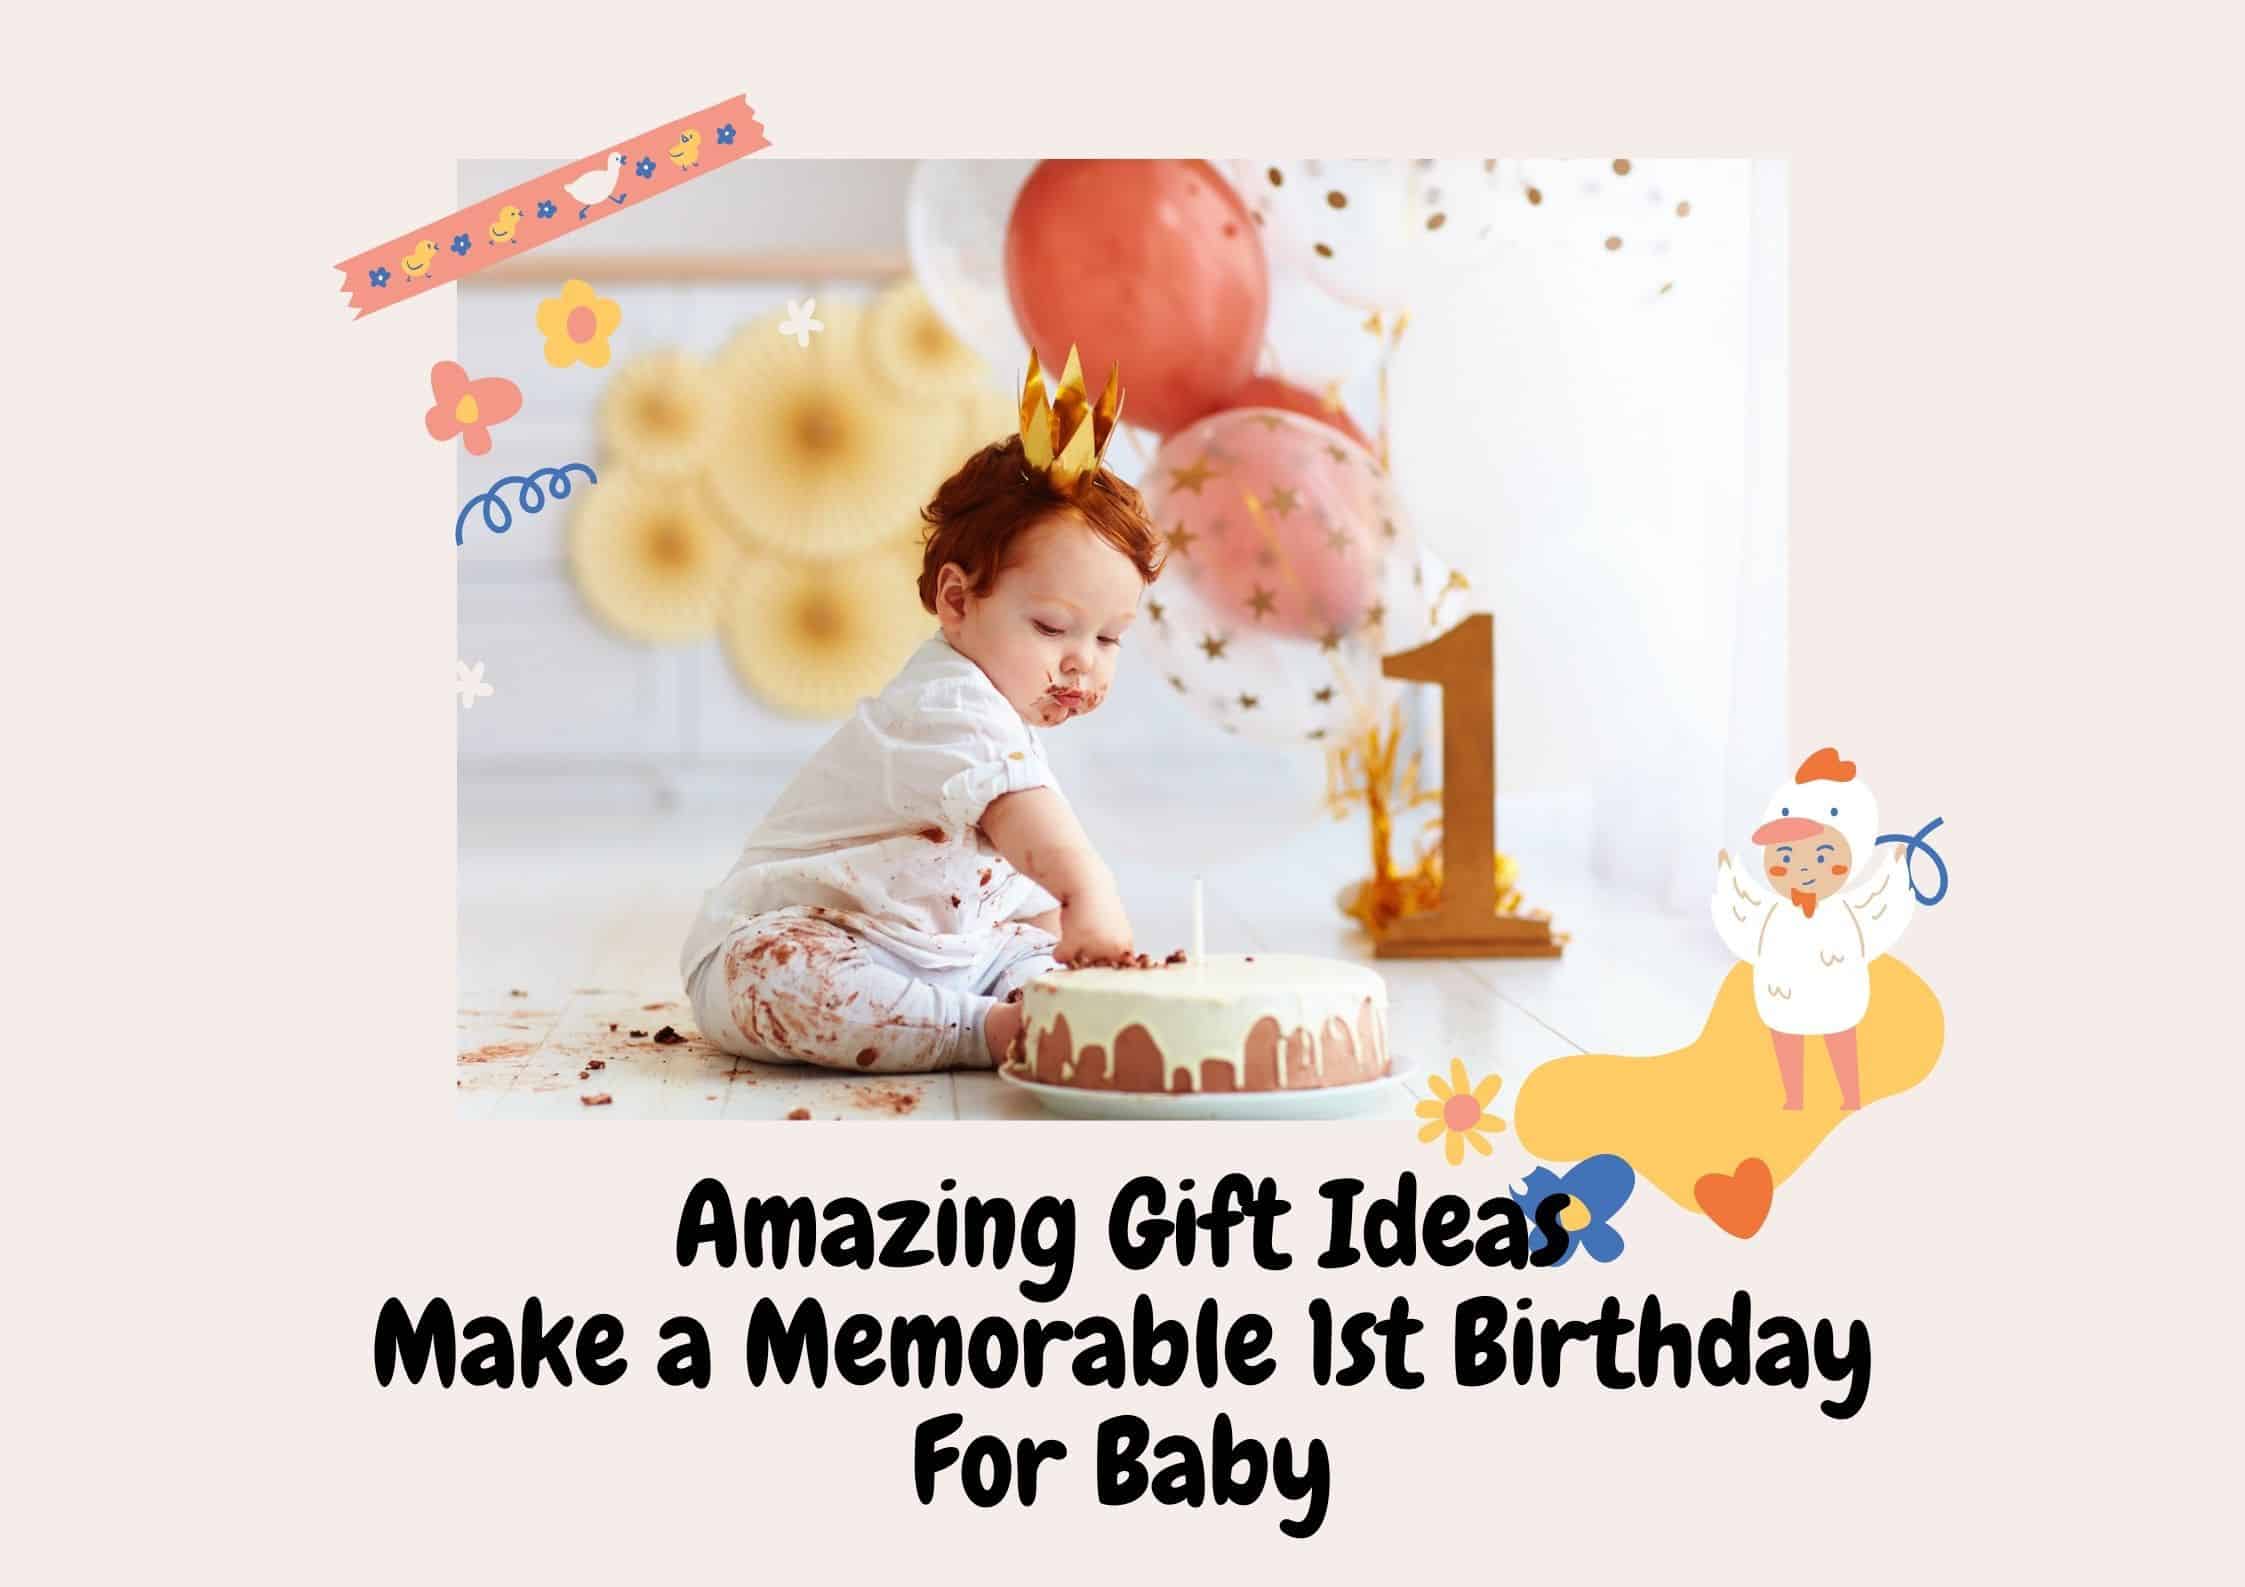 25+ Meaningful Gift Ideas to Make a Memorable First Birthday For Baby (2022)